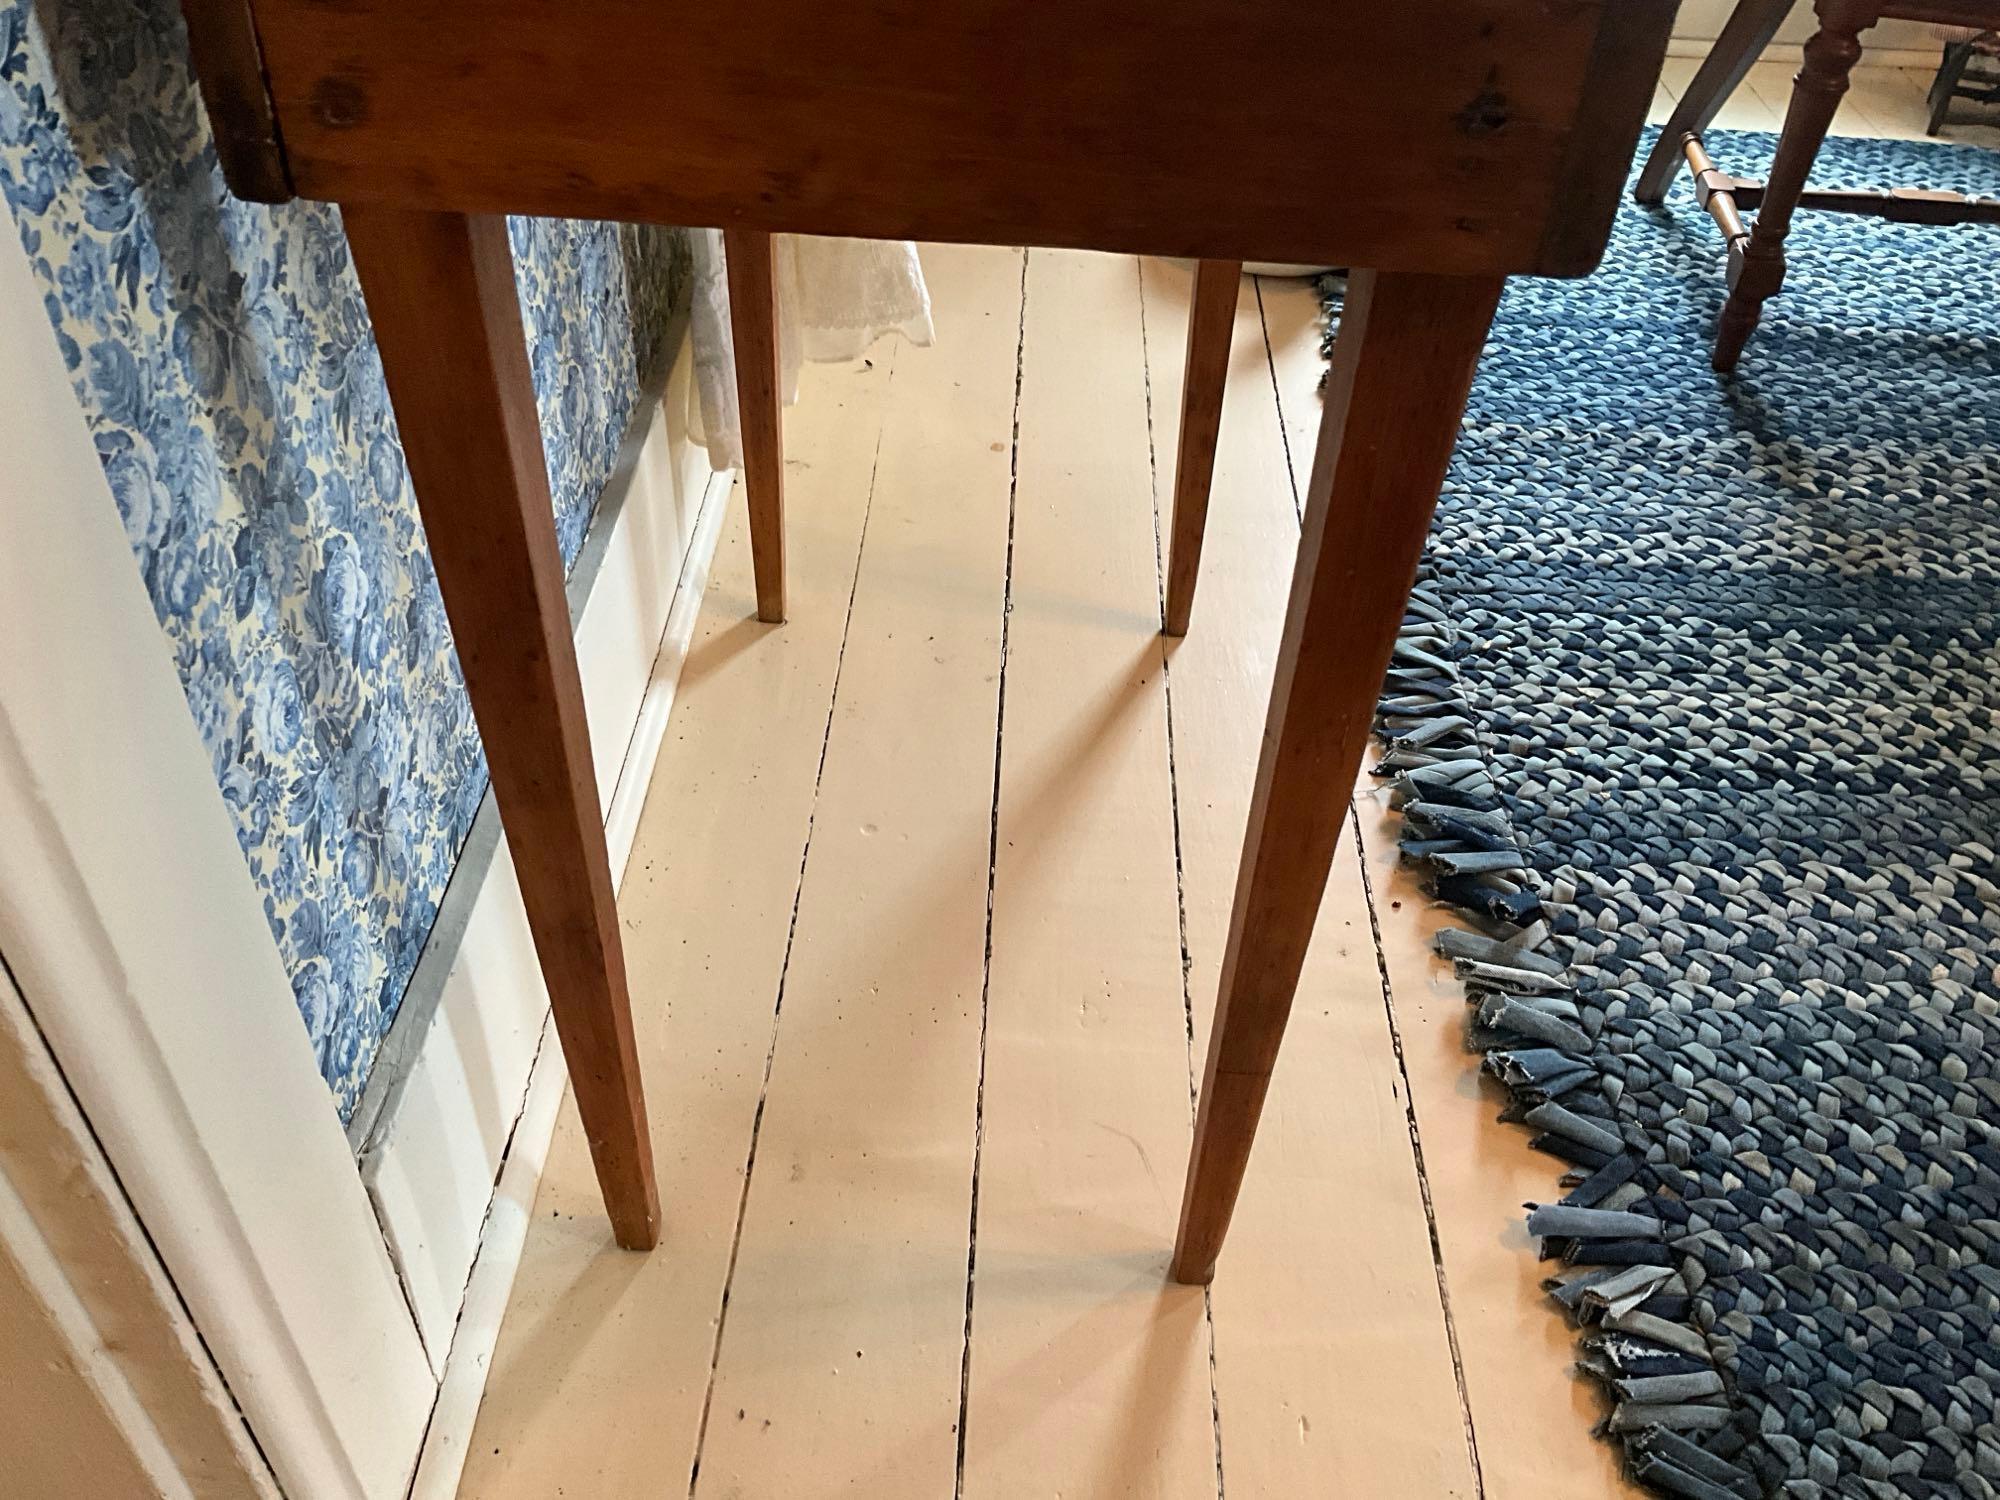 Primitive Pine Single Drawer Stand Table on Skinny Legs